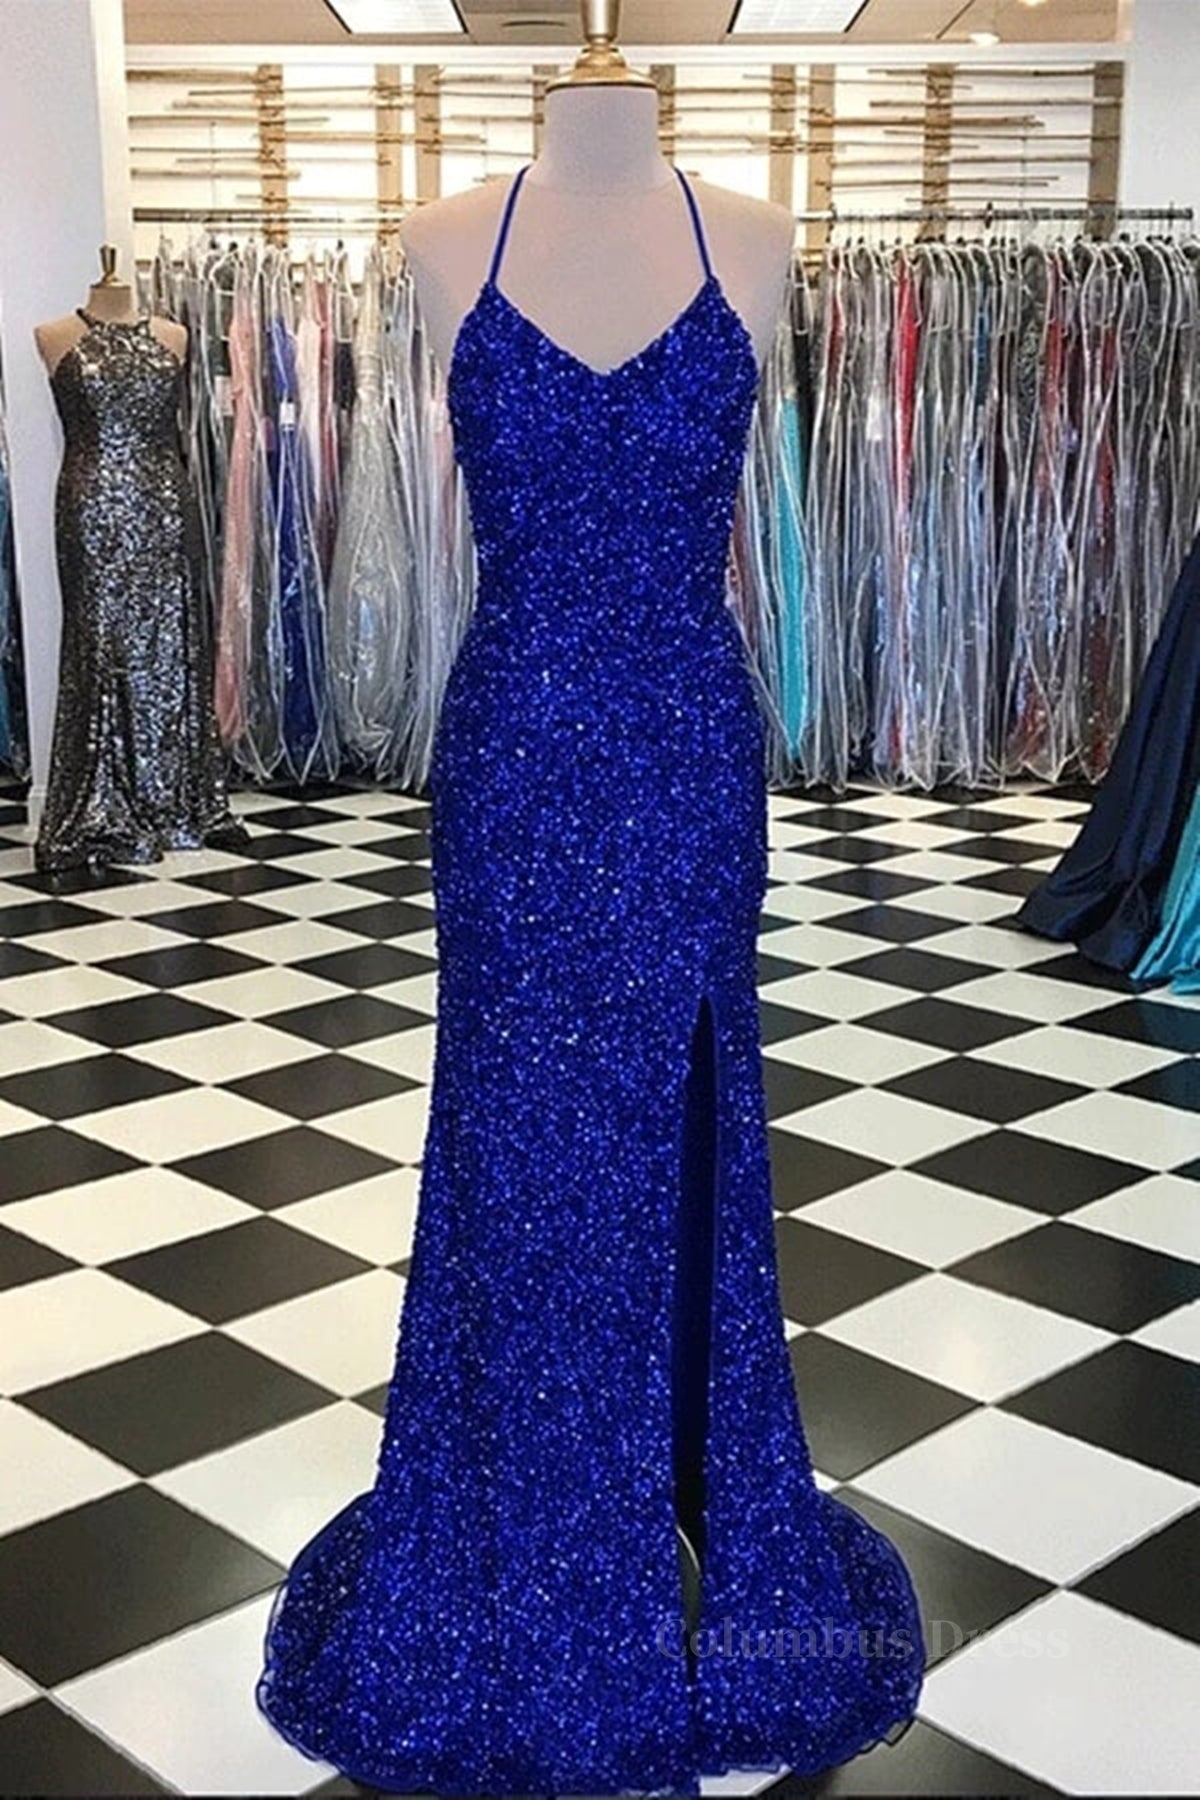 Shiny Blue Sequins Mermaid Backless Long Corset Prom Dress with High Slit, Mermaid Blue Corset Formal Dress, Blue Evening Dress outfit, Bridesmaid Dresses In Store